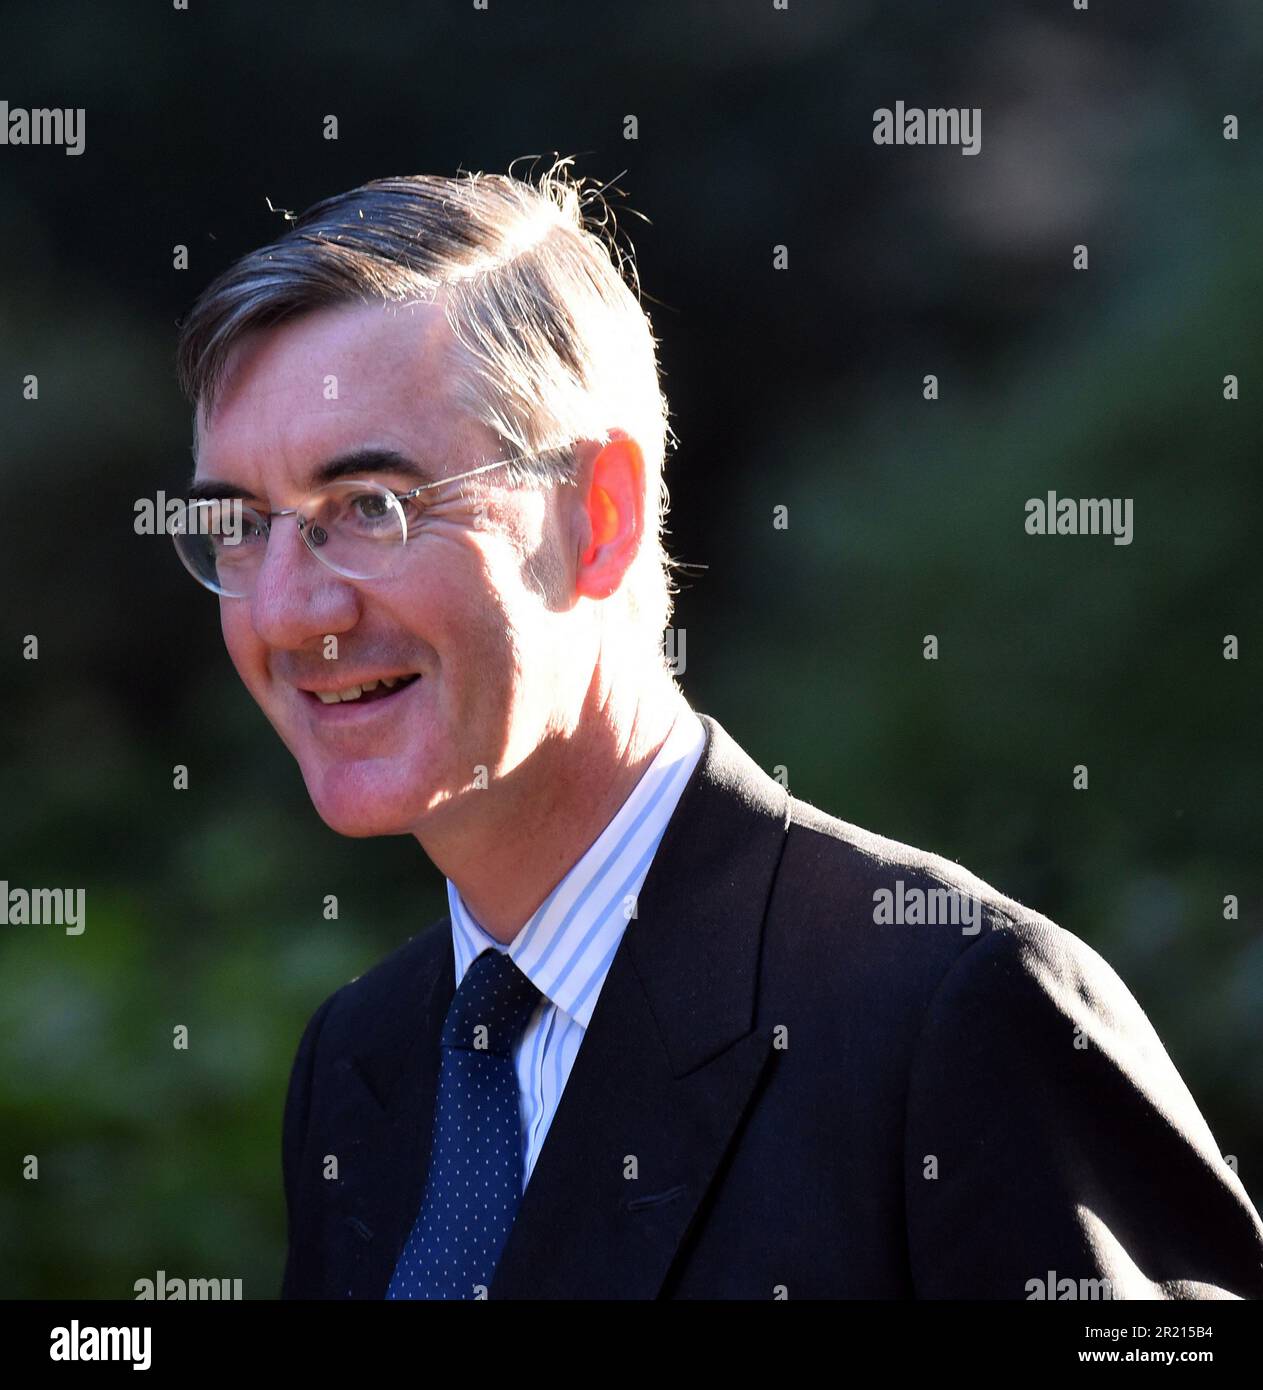 Jacob William Rees-Mogg (born 24 May 1969) is a British politician serving as the Member of Parliament (MP) for North East Somerset since 2010. Now a backbencher, he served as Leader of the House of Commons and Lord President of the Council from 2019 to 2022, Minister of State for Brexit Opportunities and Government Efficiency from February to September 2022 and Secretary of State for Business, Energy and Industrial Strategy from September to October 2022. A member of the Conservative Party, Stock Photo